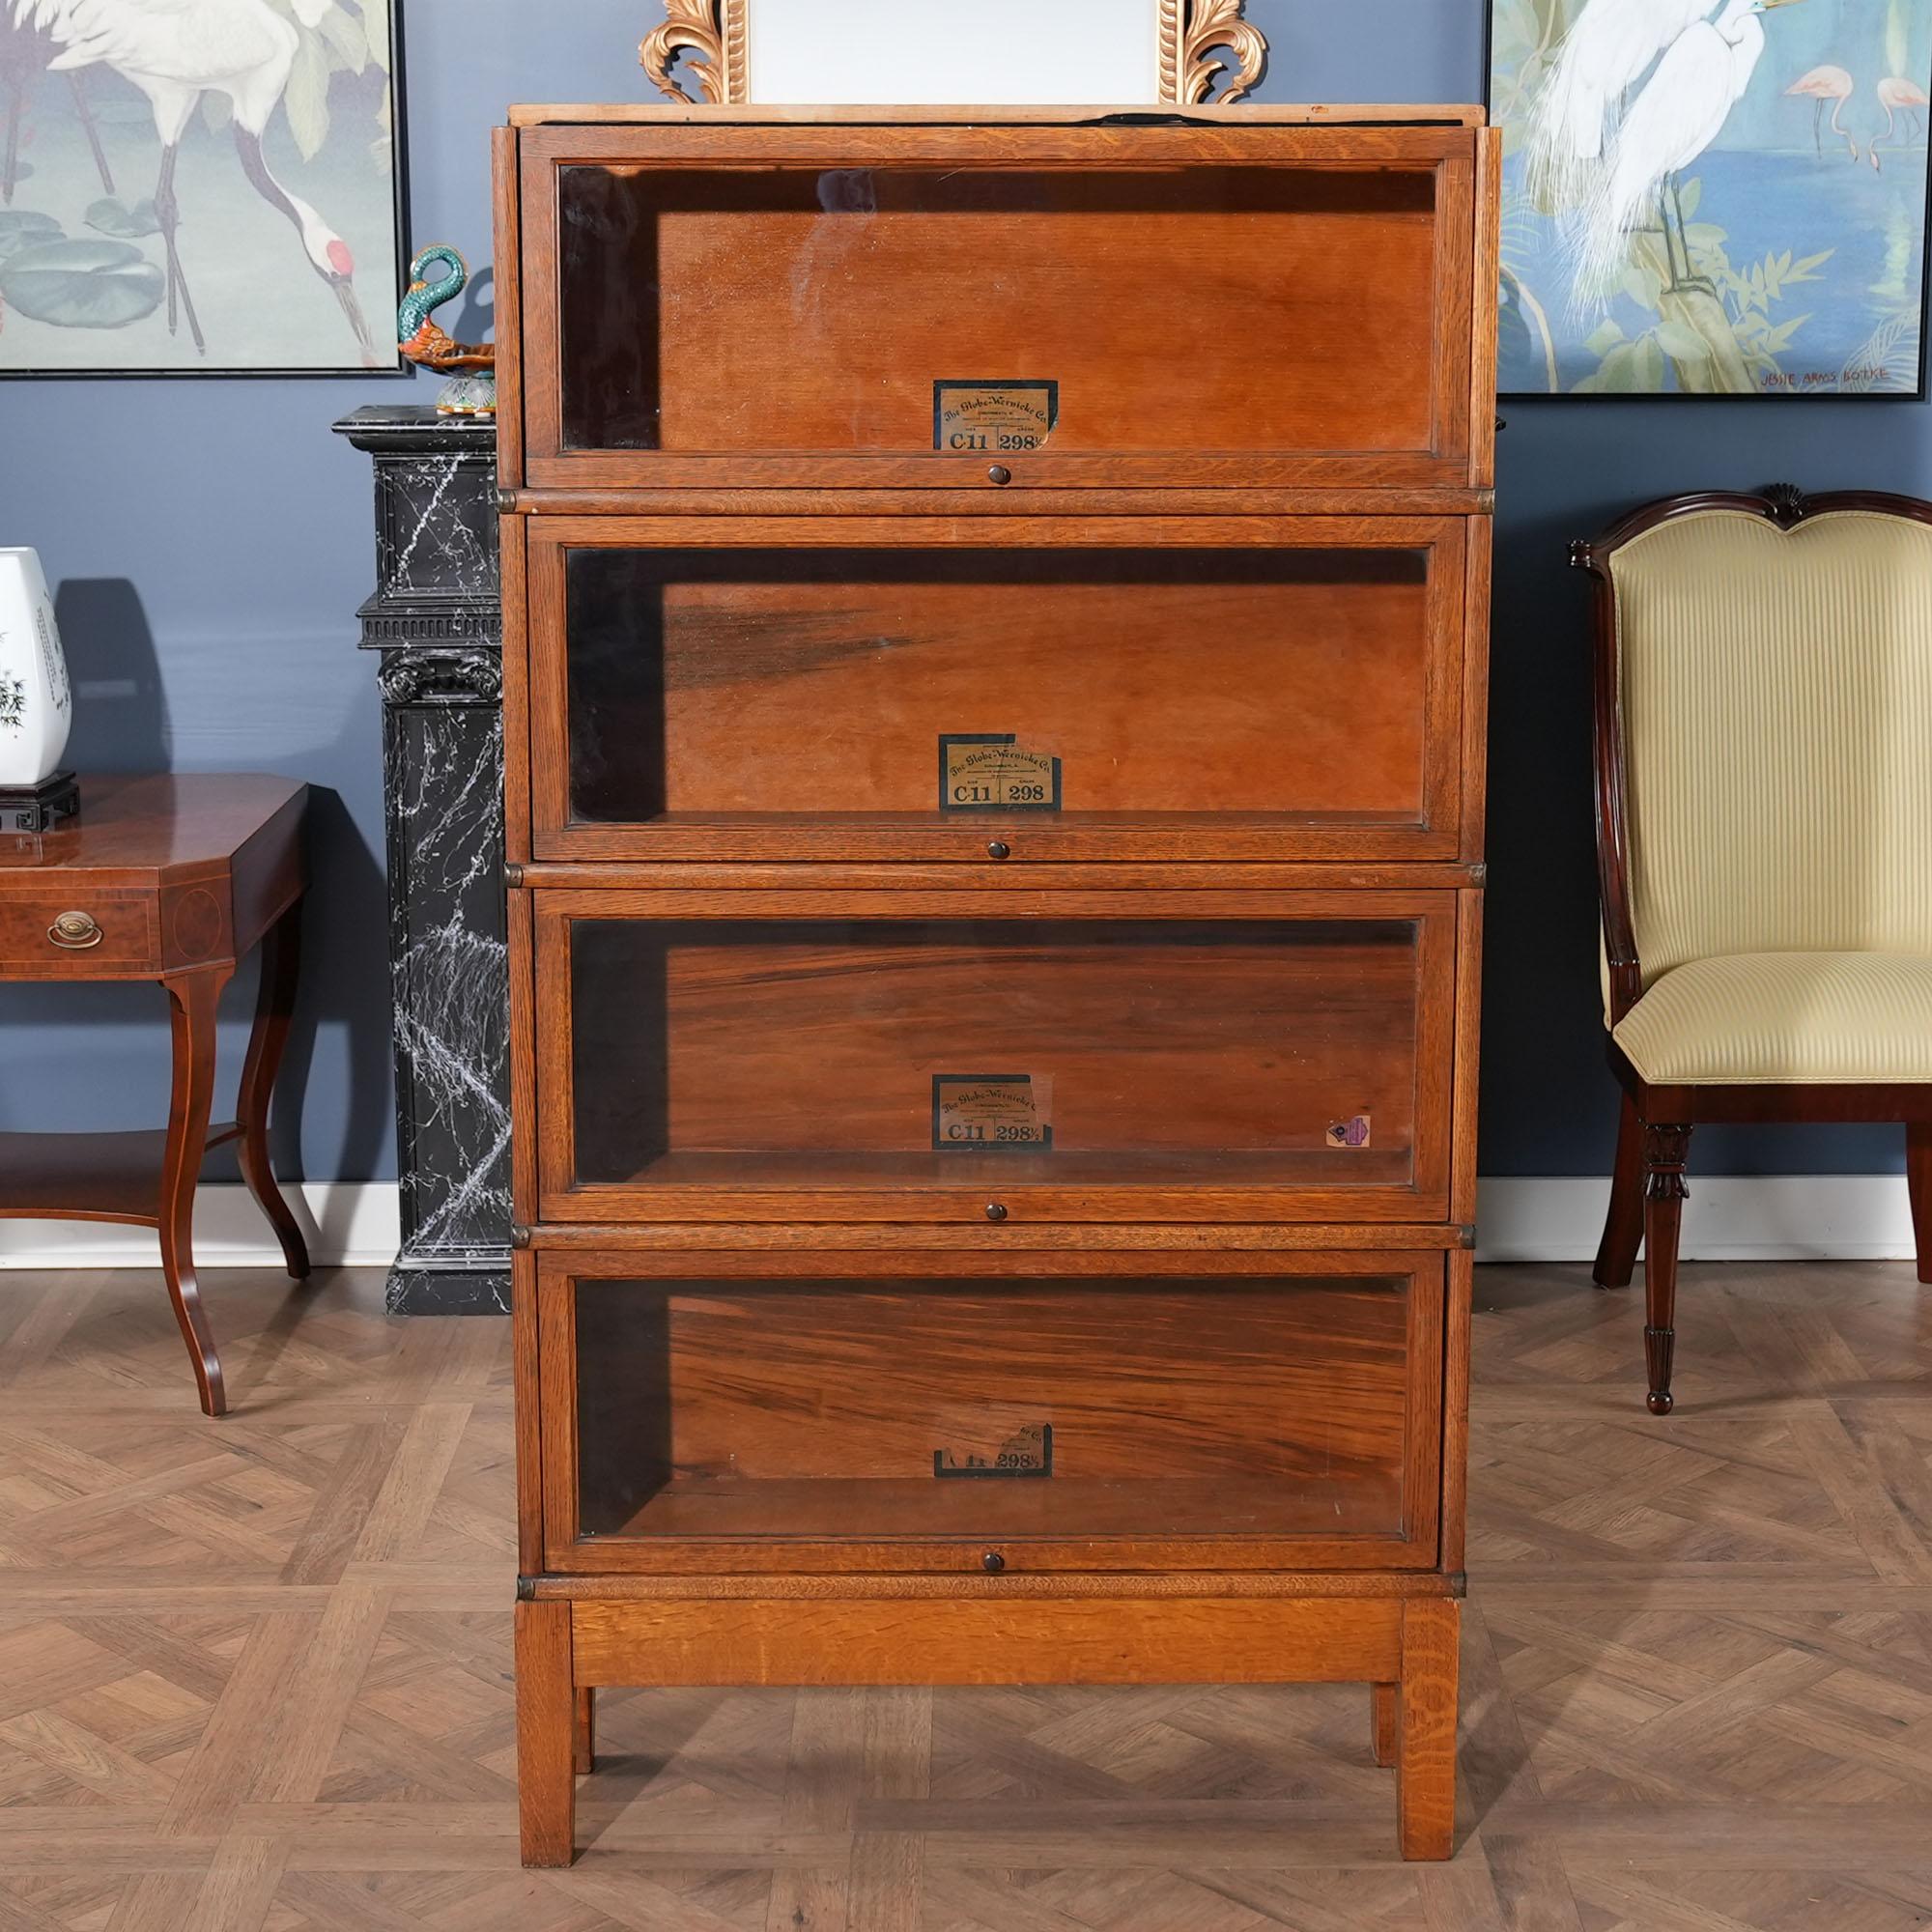 Vintage Oak Globe Wernicke Bookcase In Good Condition For Sale In Annville, PA